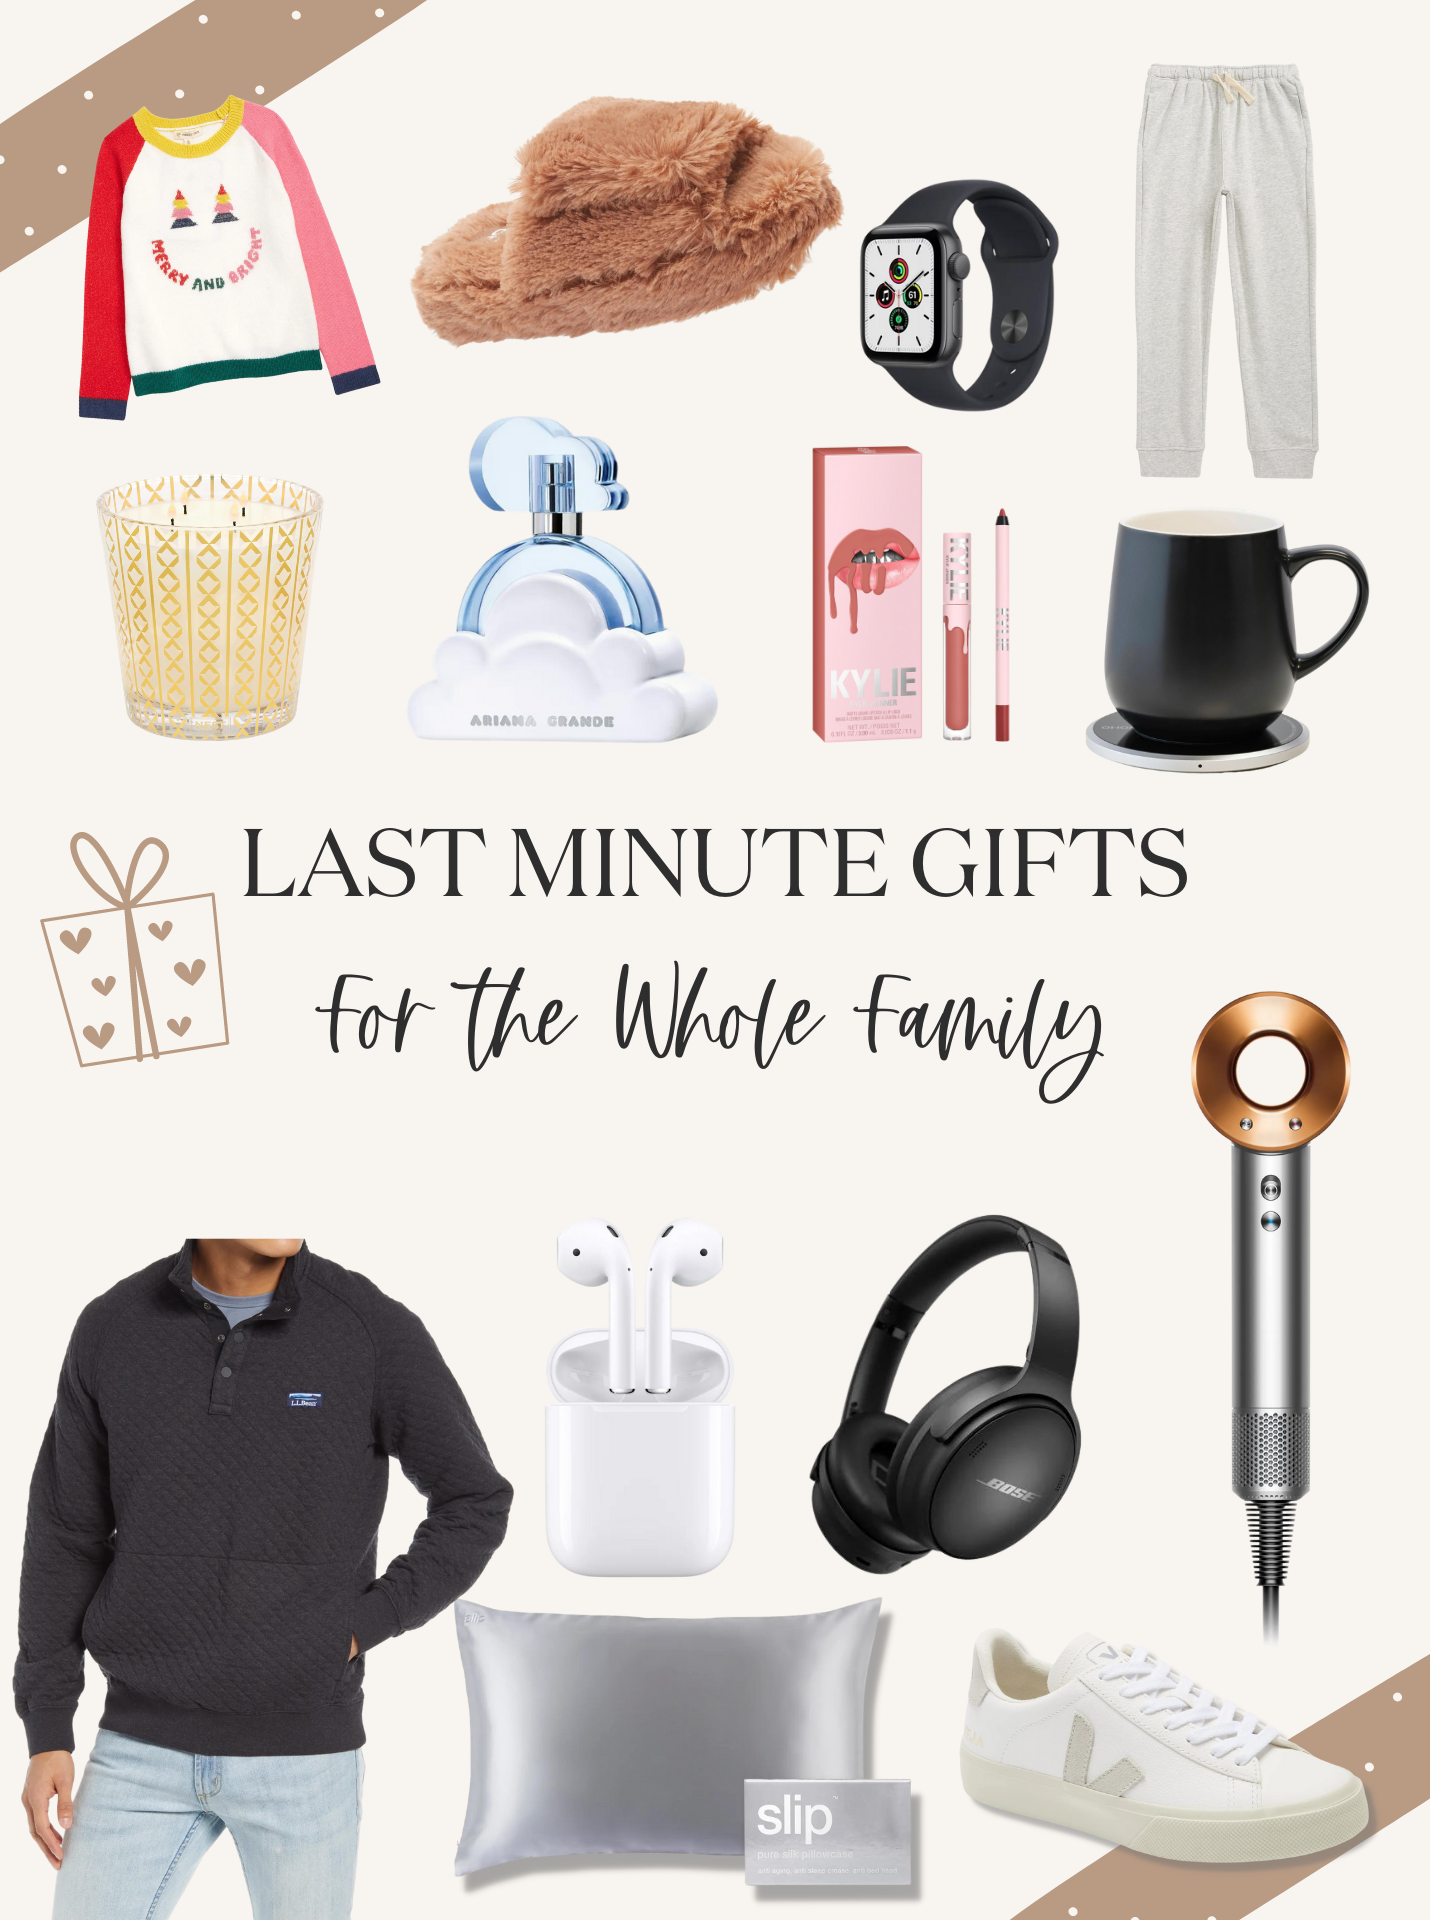 LAST MINUTE GIFTS - Nordstrom and Walmart